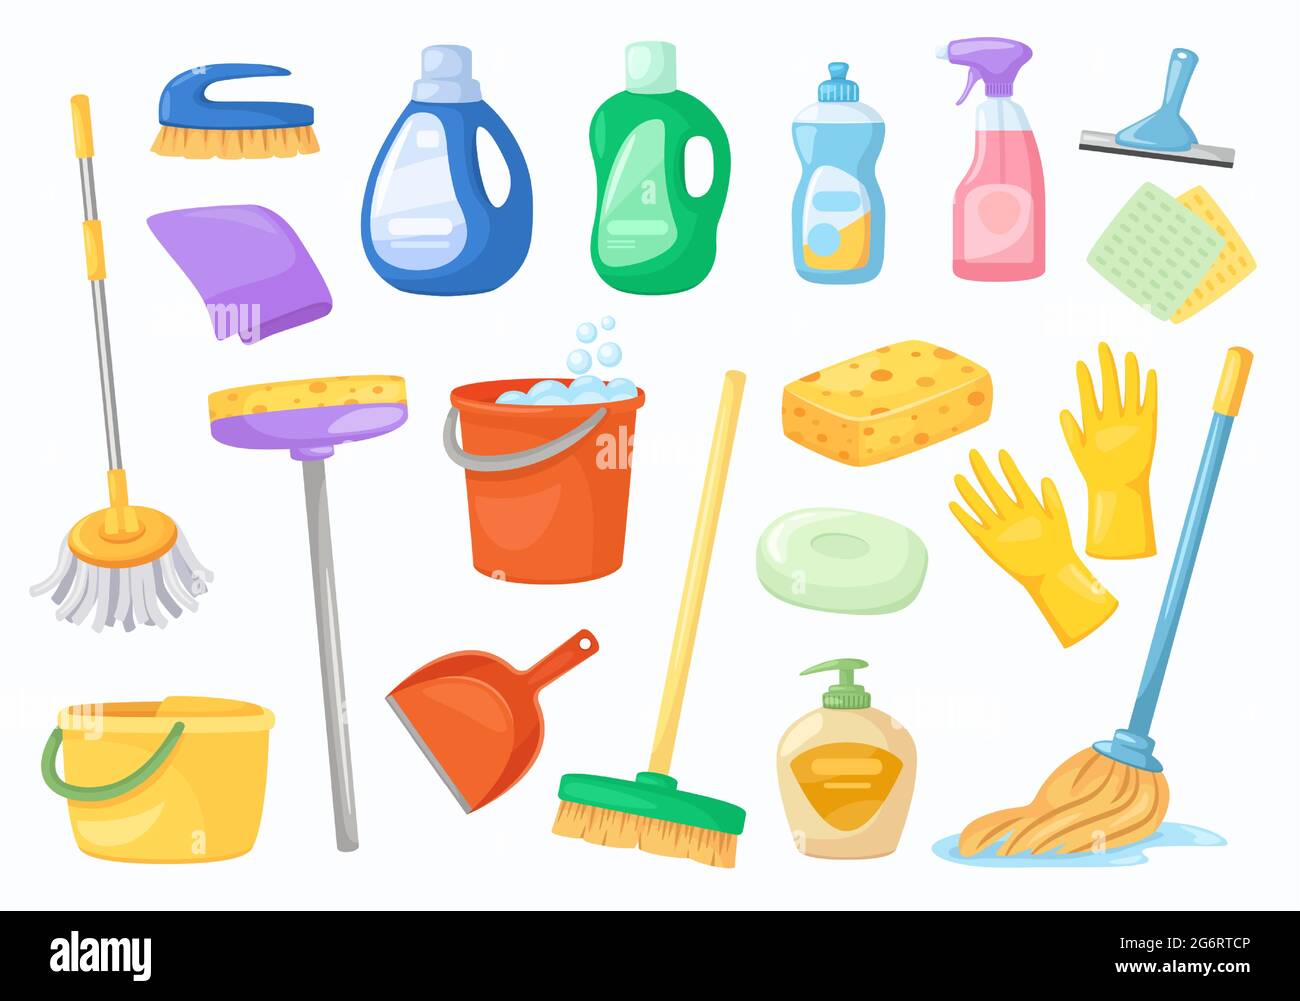 https://c8.alamy.com/comp/2G6RTCP/cleaning-tools-napkin-bucket-broom-gloves-mop-detergent-or-disinfectant-bottles-household-cleaning-products-and-equipment-vector-set-housekeeping-isolated-chemicals-and-liquids-2G6RTCP.jpg